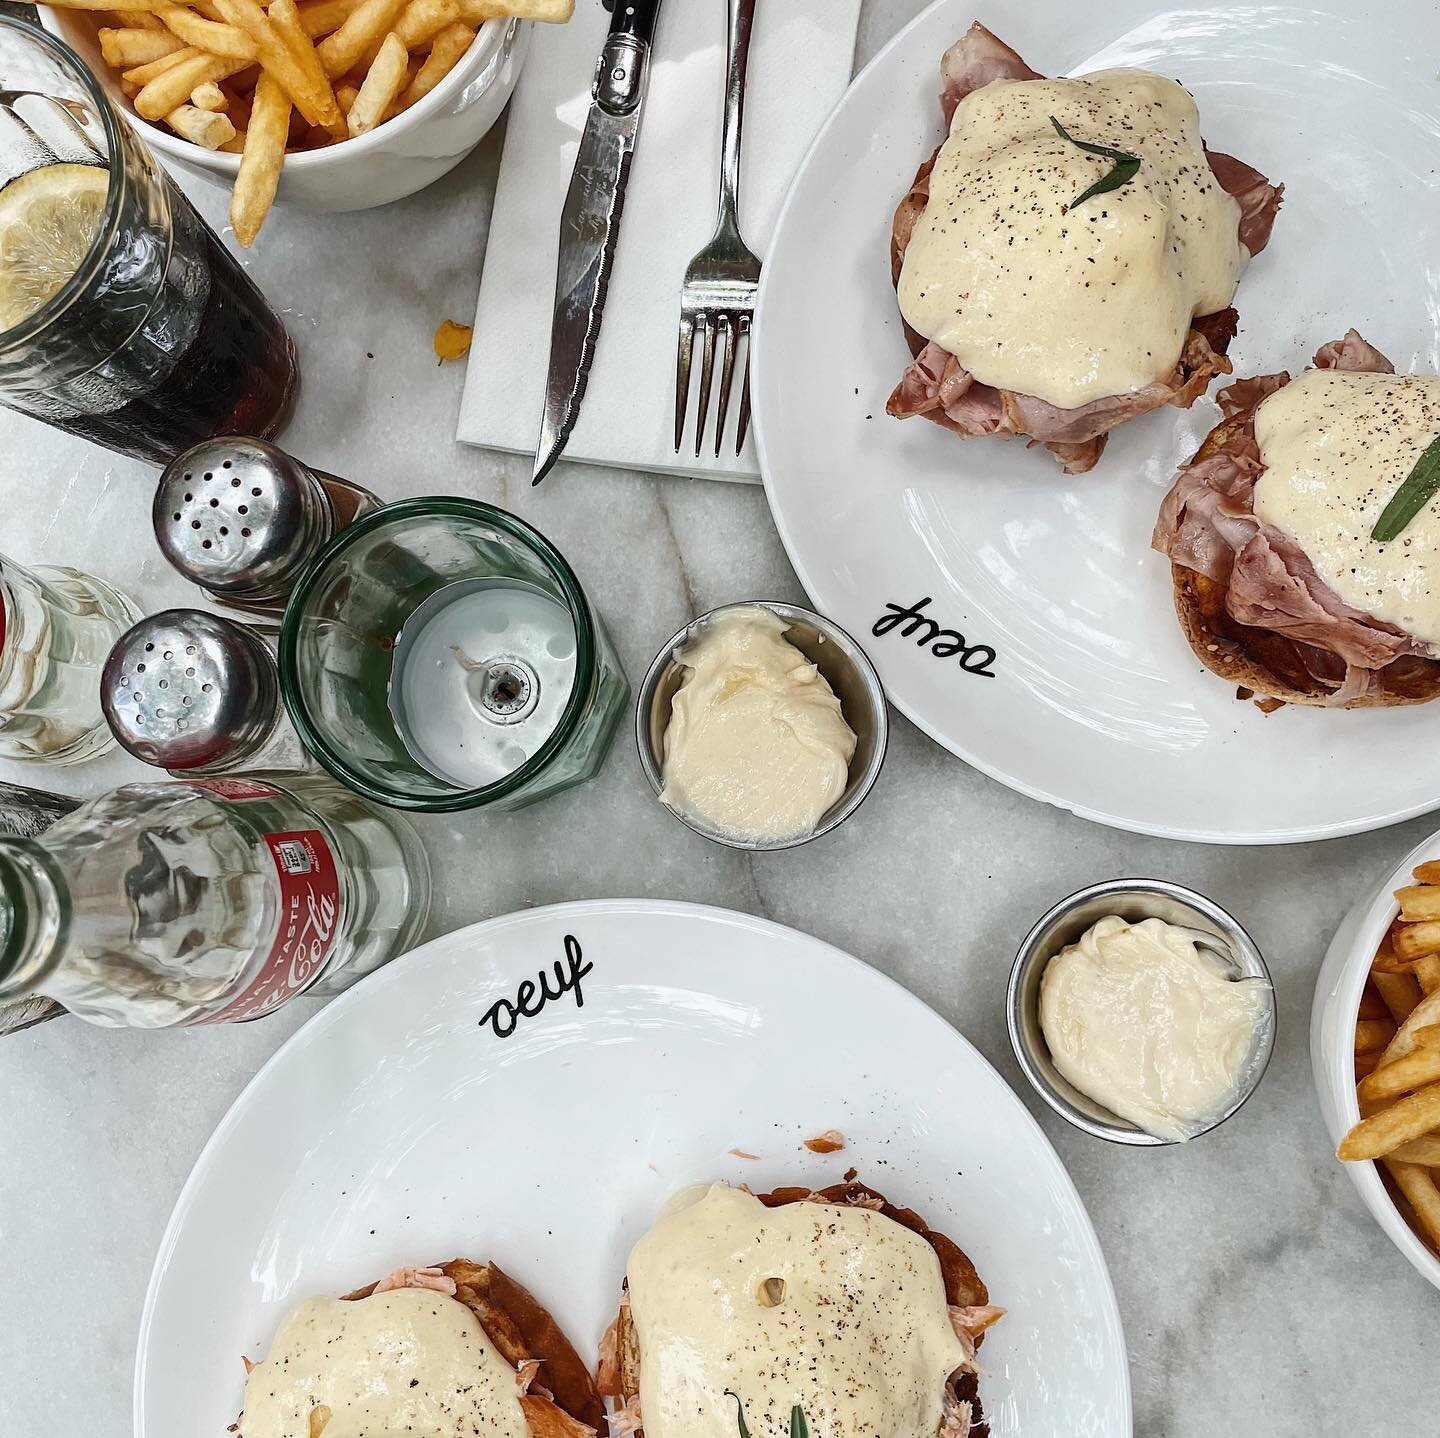 Fries day + eggs 🍟 🍳 Tag your food adventures @brunchesandcoffees to be featured!

__
#amsterdam #brunchesandcoffees #weekend #brunchtime #brunching #foodies #amsterdamfood #netherlands #dutch #dutchreview #travel #explore #discover #fridayfeeling 